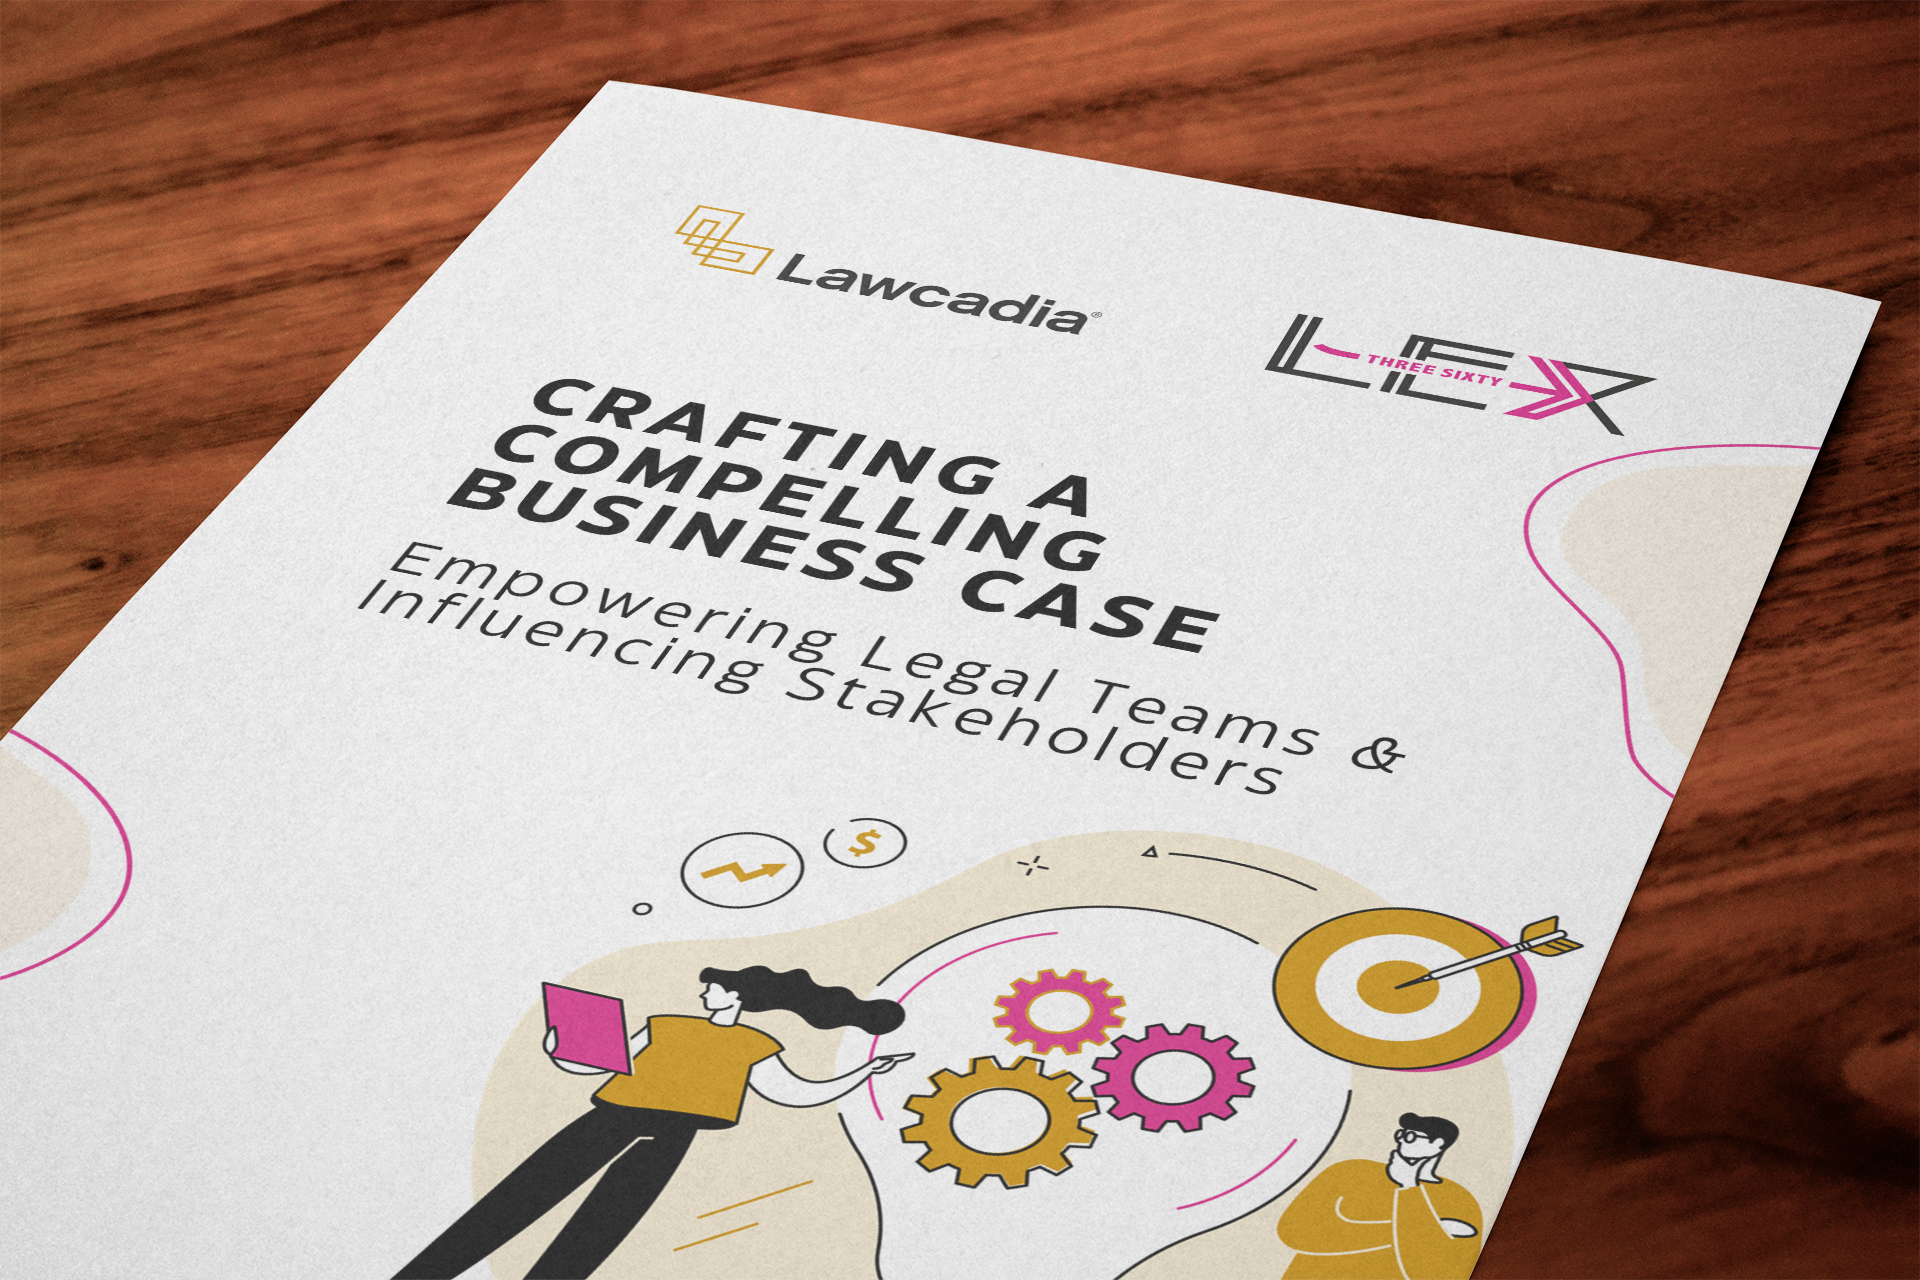 The importance of crafting a compelling business case